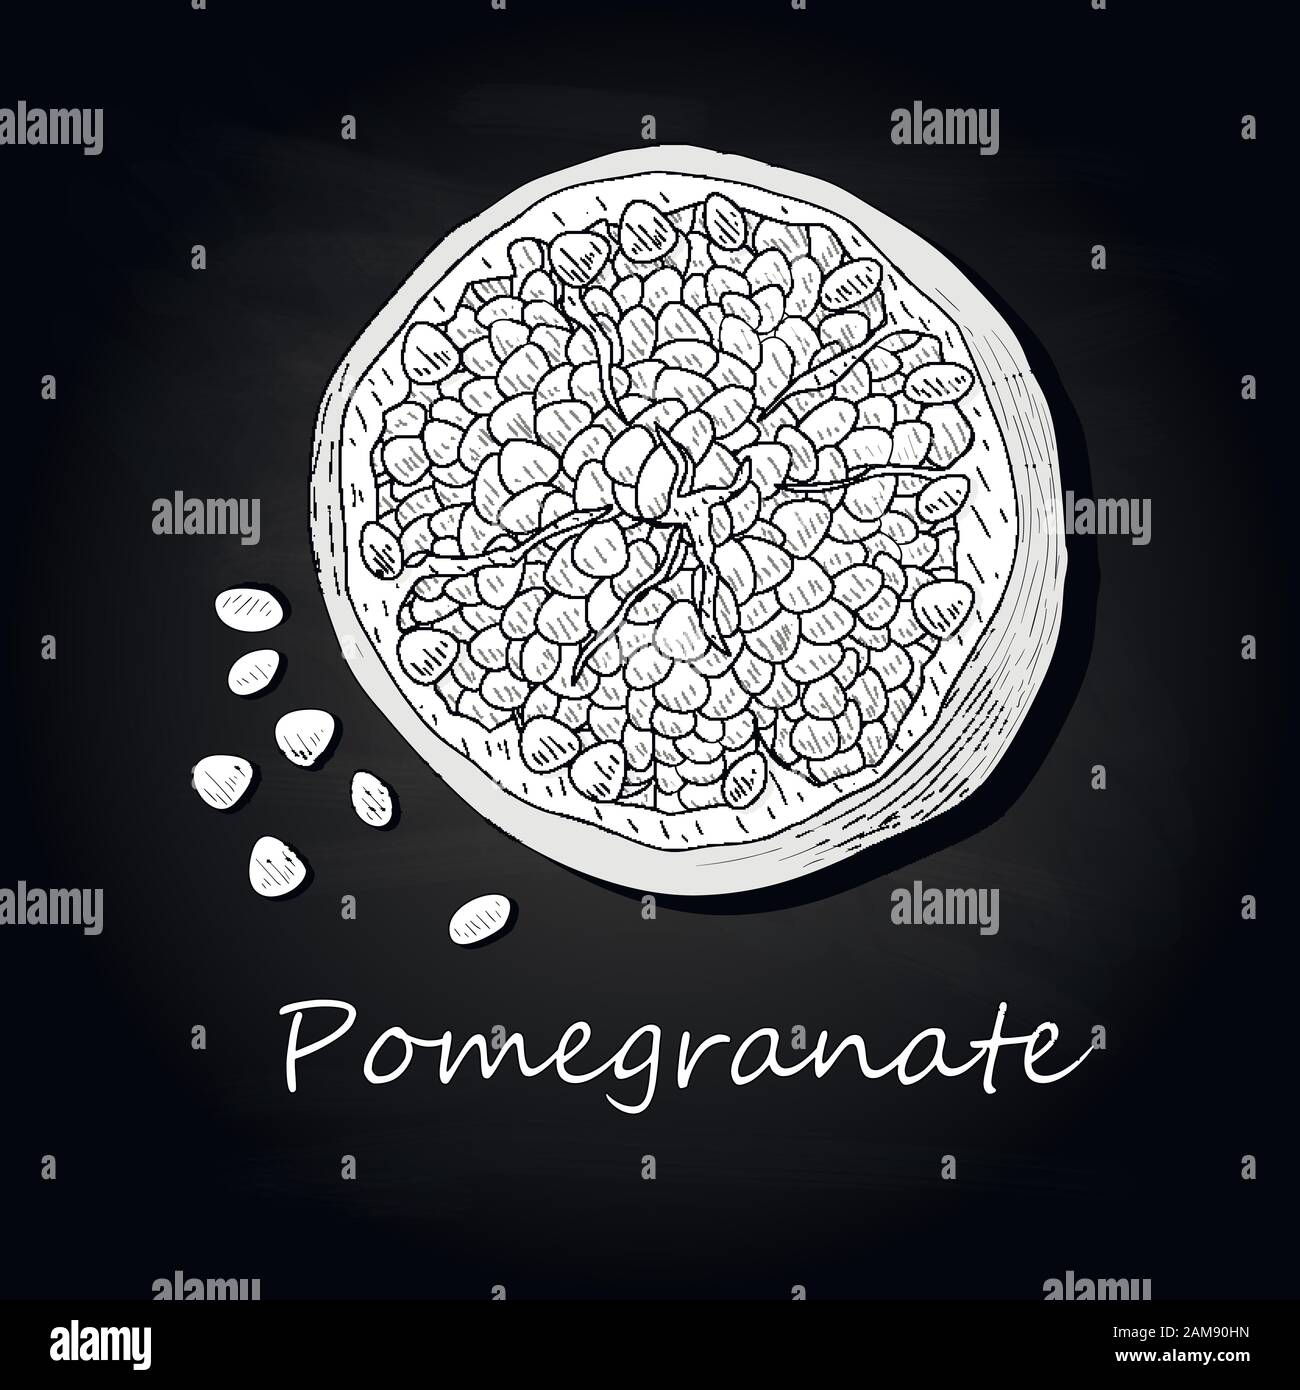 Pomegranate hand drown vector illustration isolated on black background. Monochrome. Stock Vector